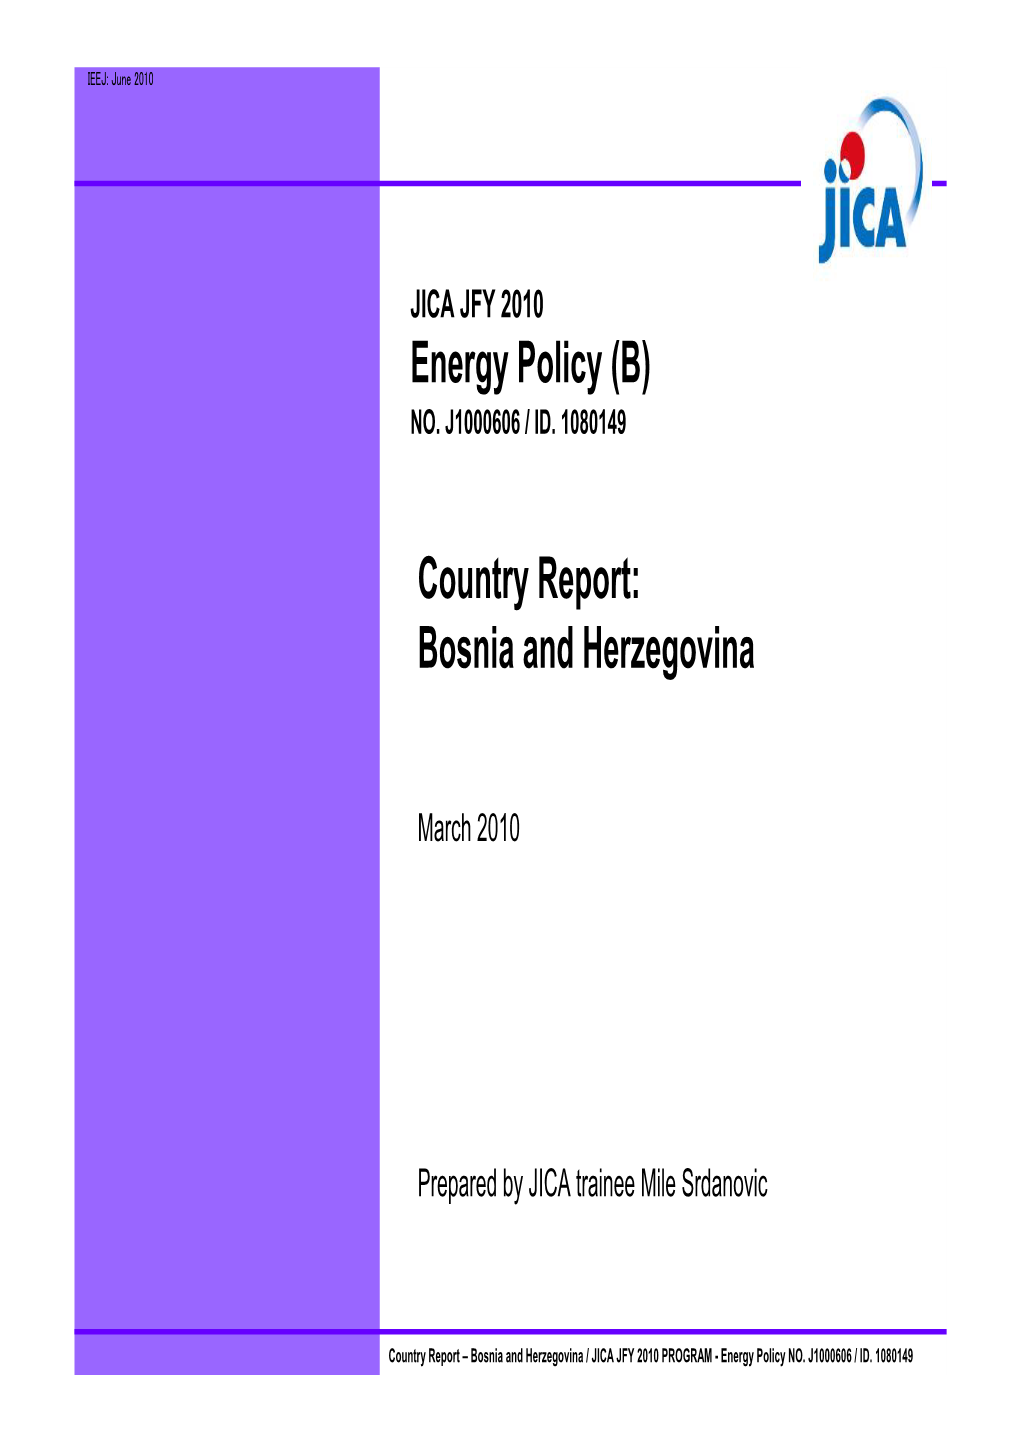 Energy Policy (B) Country Report: Bosnia and Herzegovina